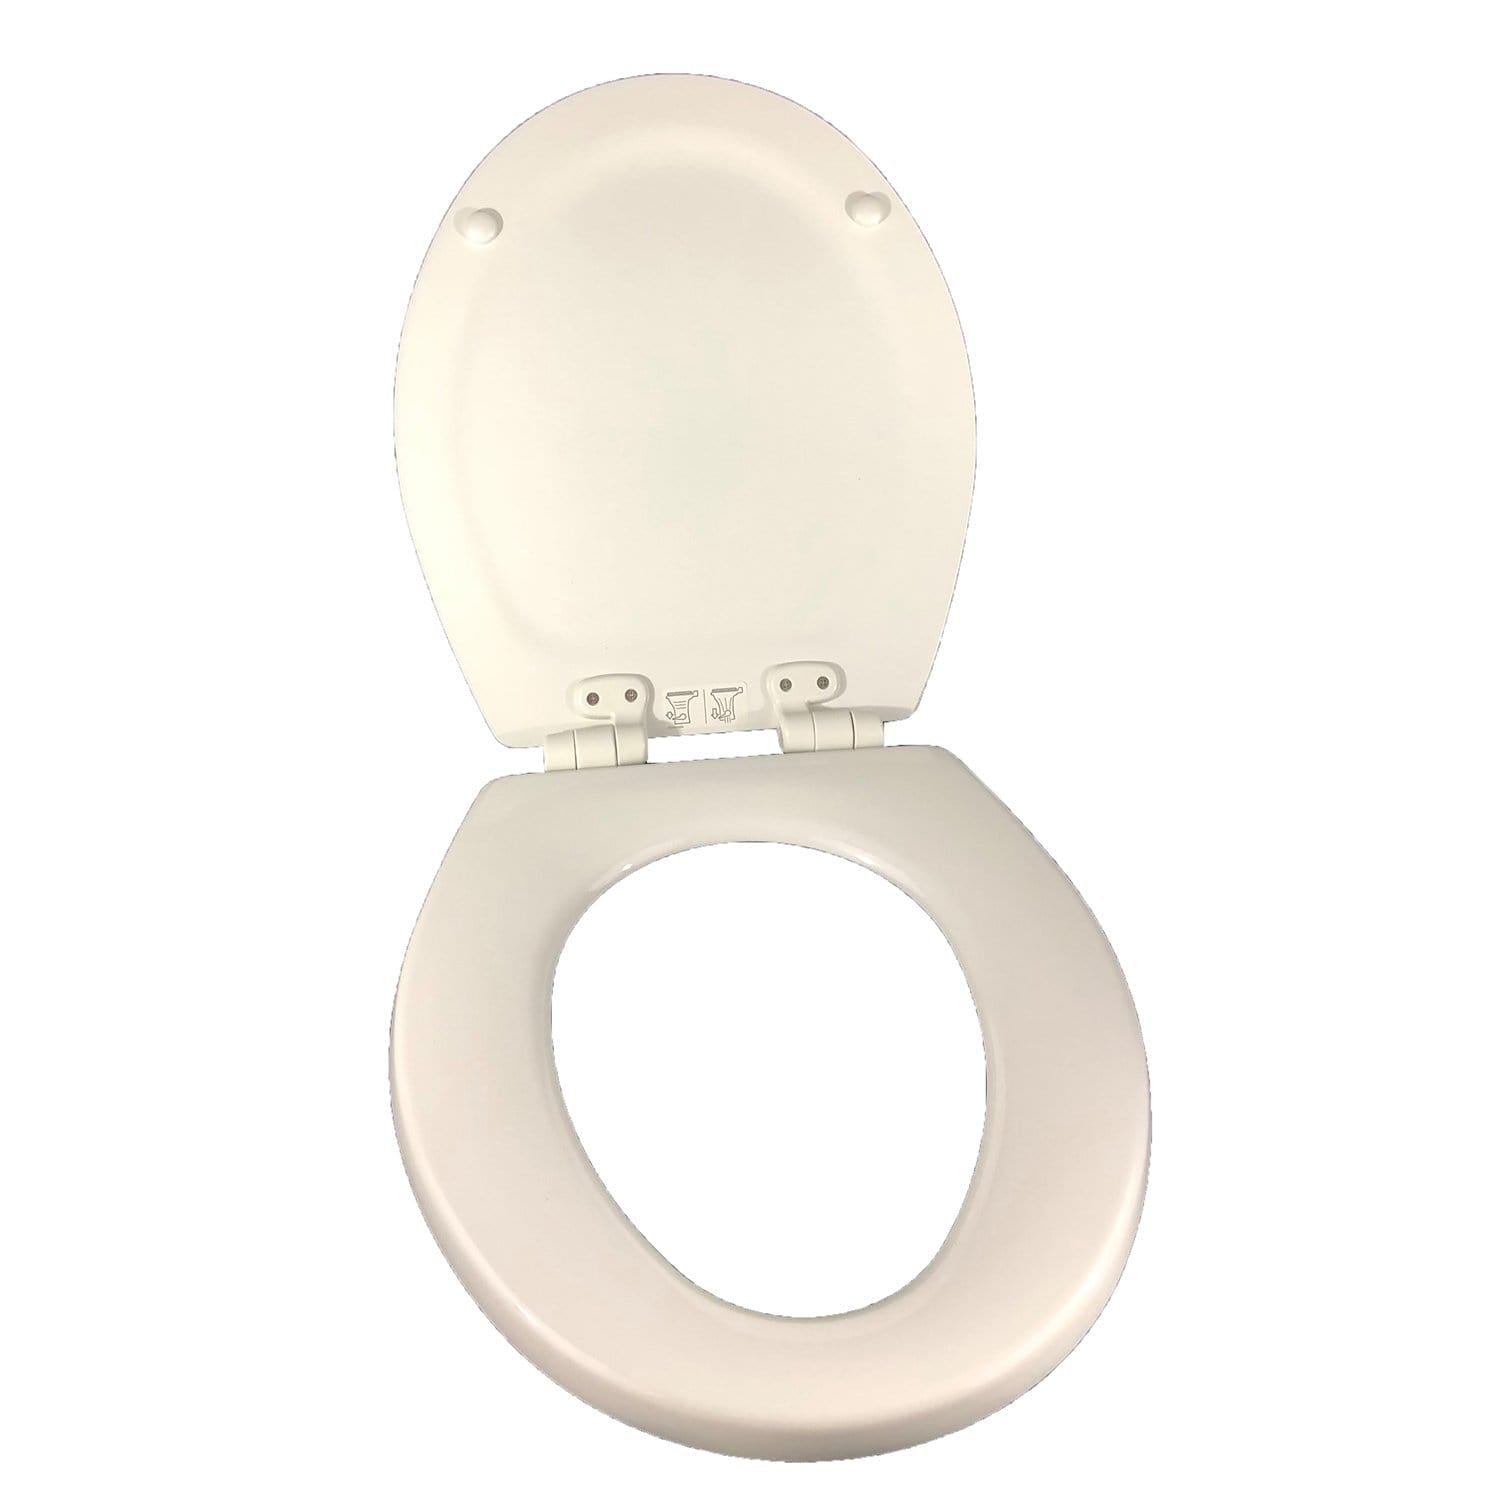 Dometic 385312075 310/311 White Replacement Toilet Seat